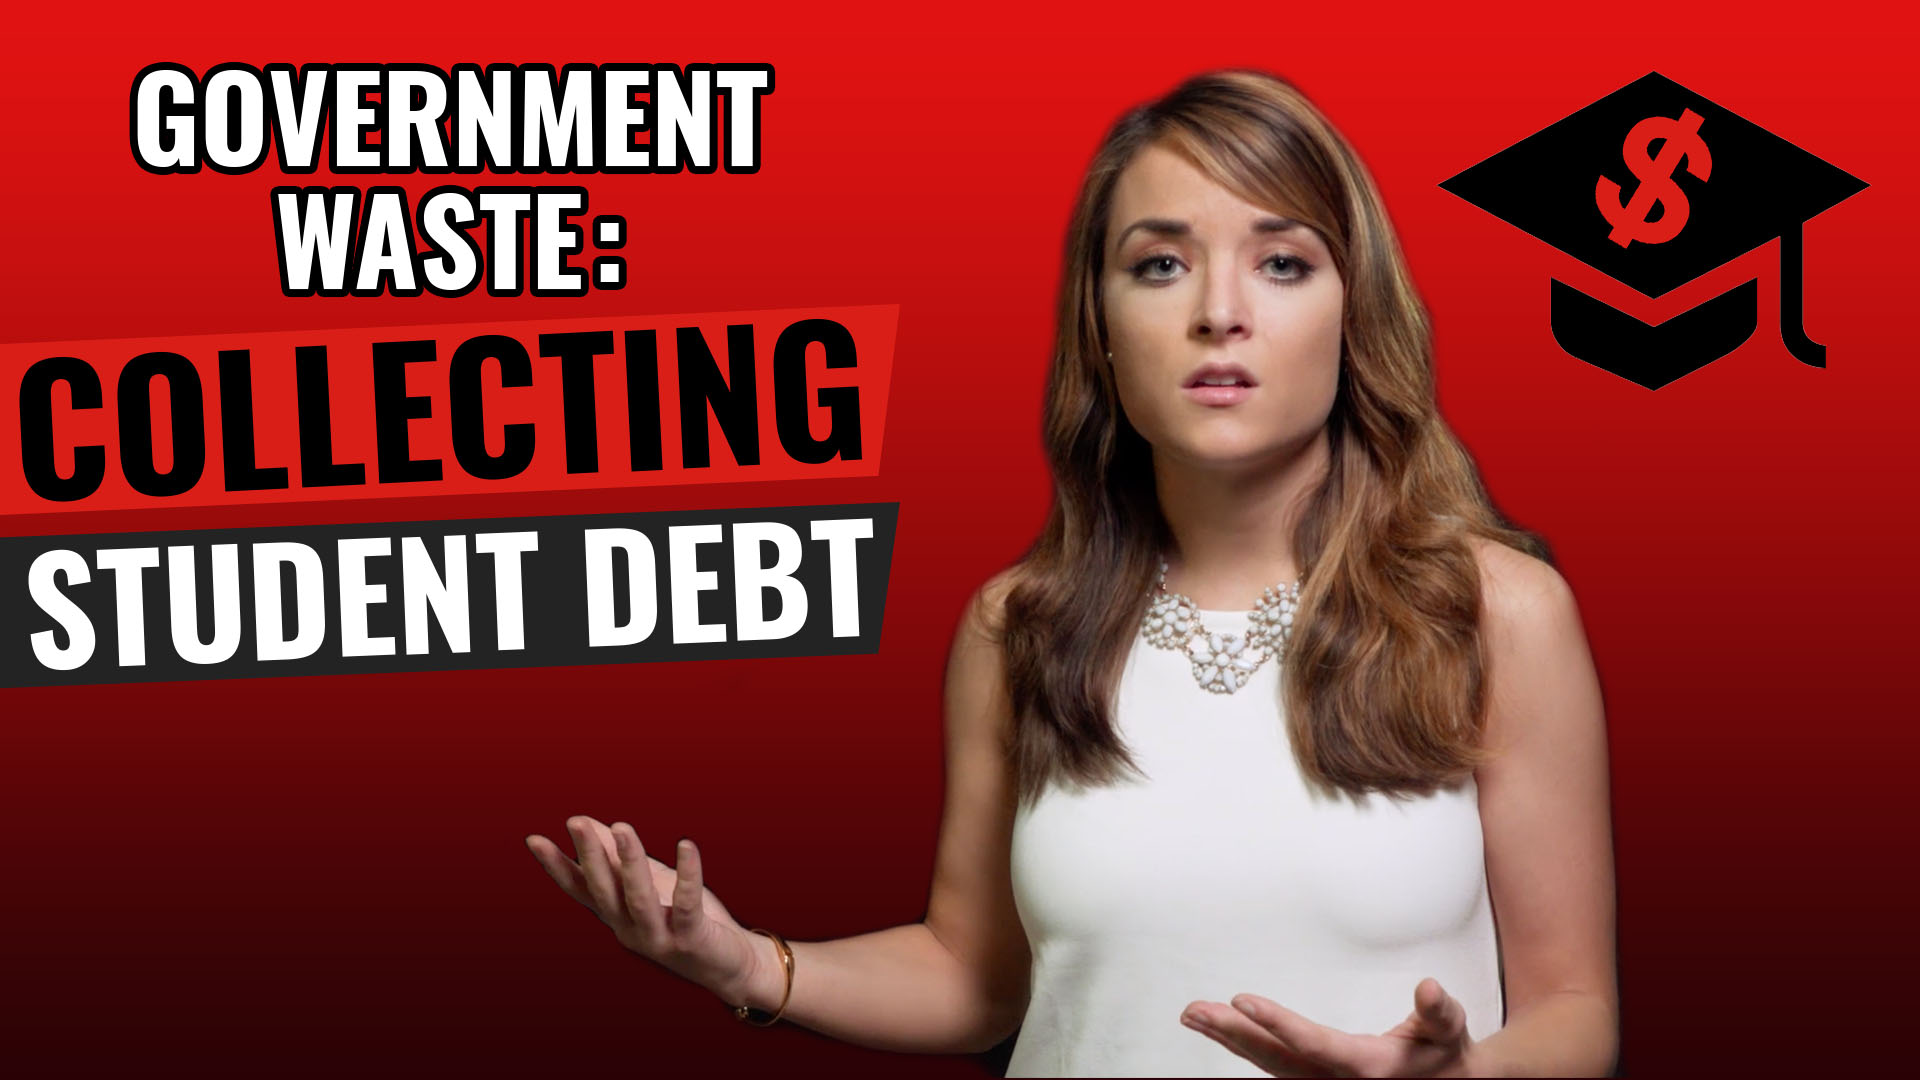 student loan debt, government waste, capitalism